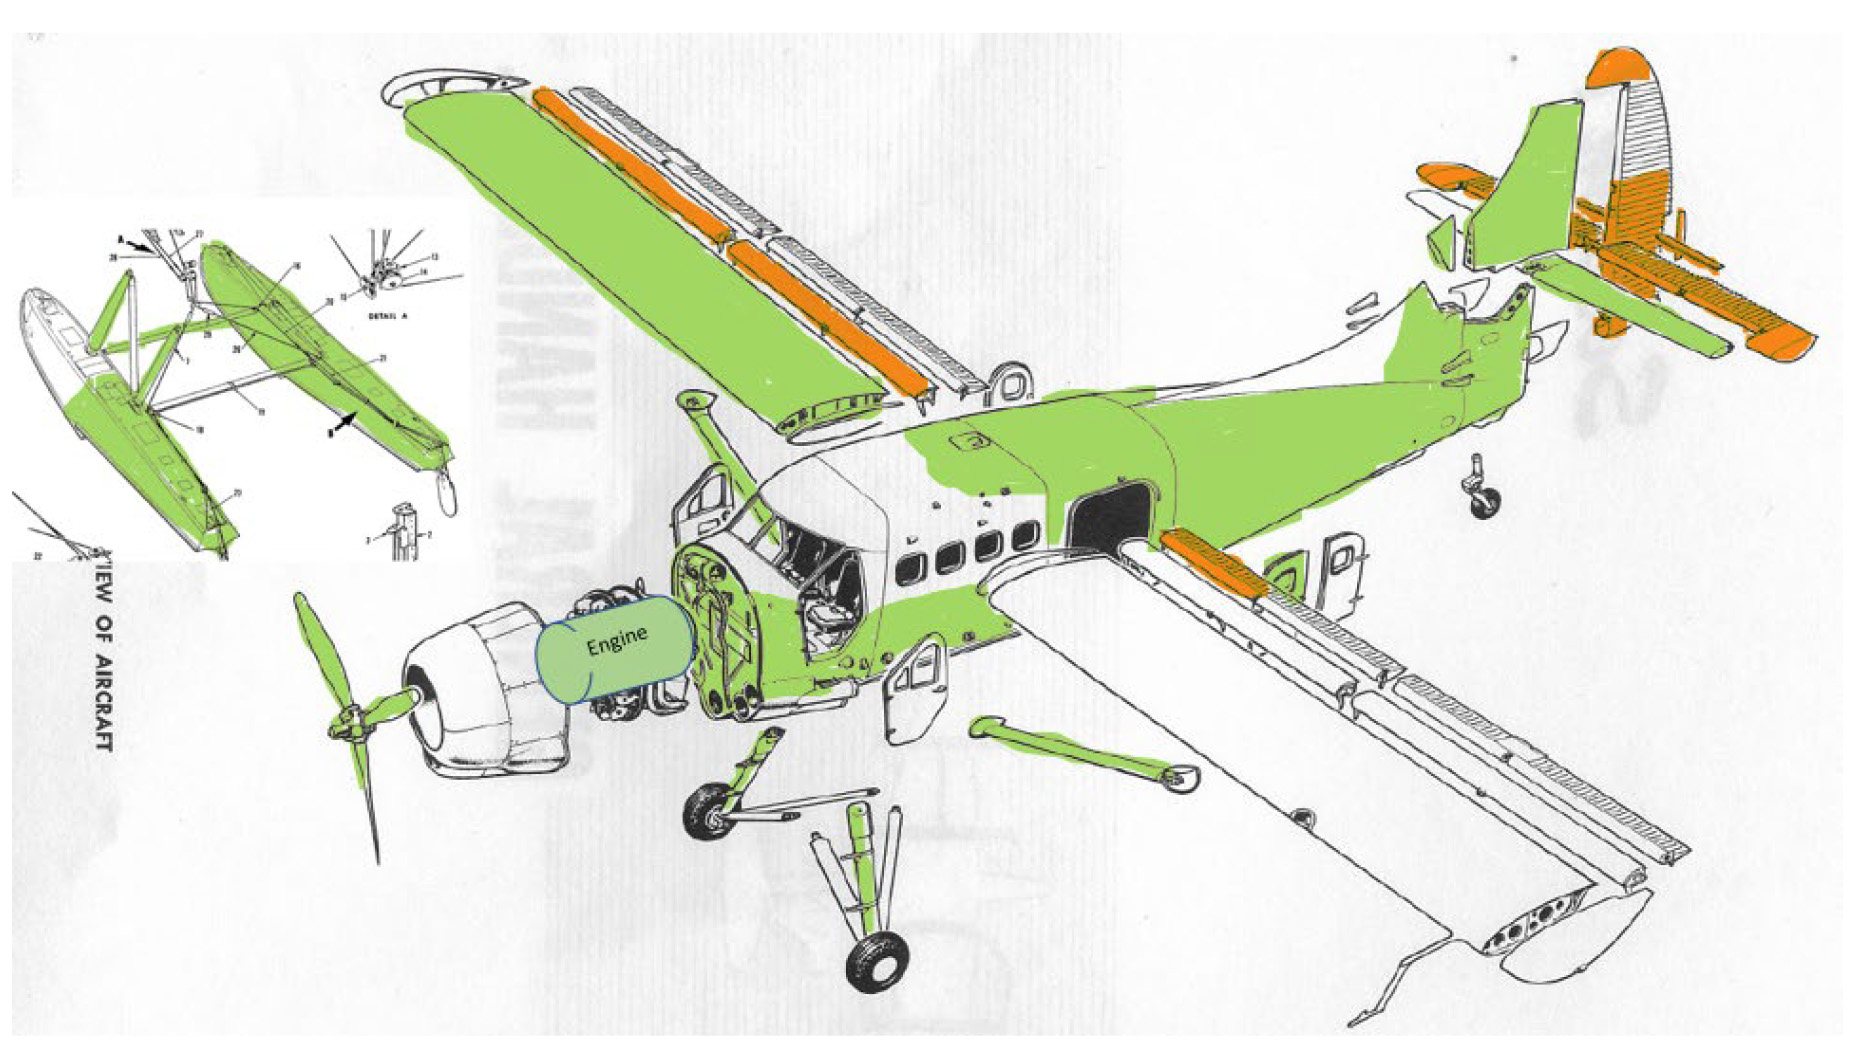 Portions of the accident aircraft wreckage that have been recovered are highlighted in green, and the recovered portions of the flight controls are highlighted in orange. NTSB image.